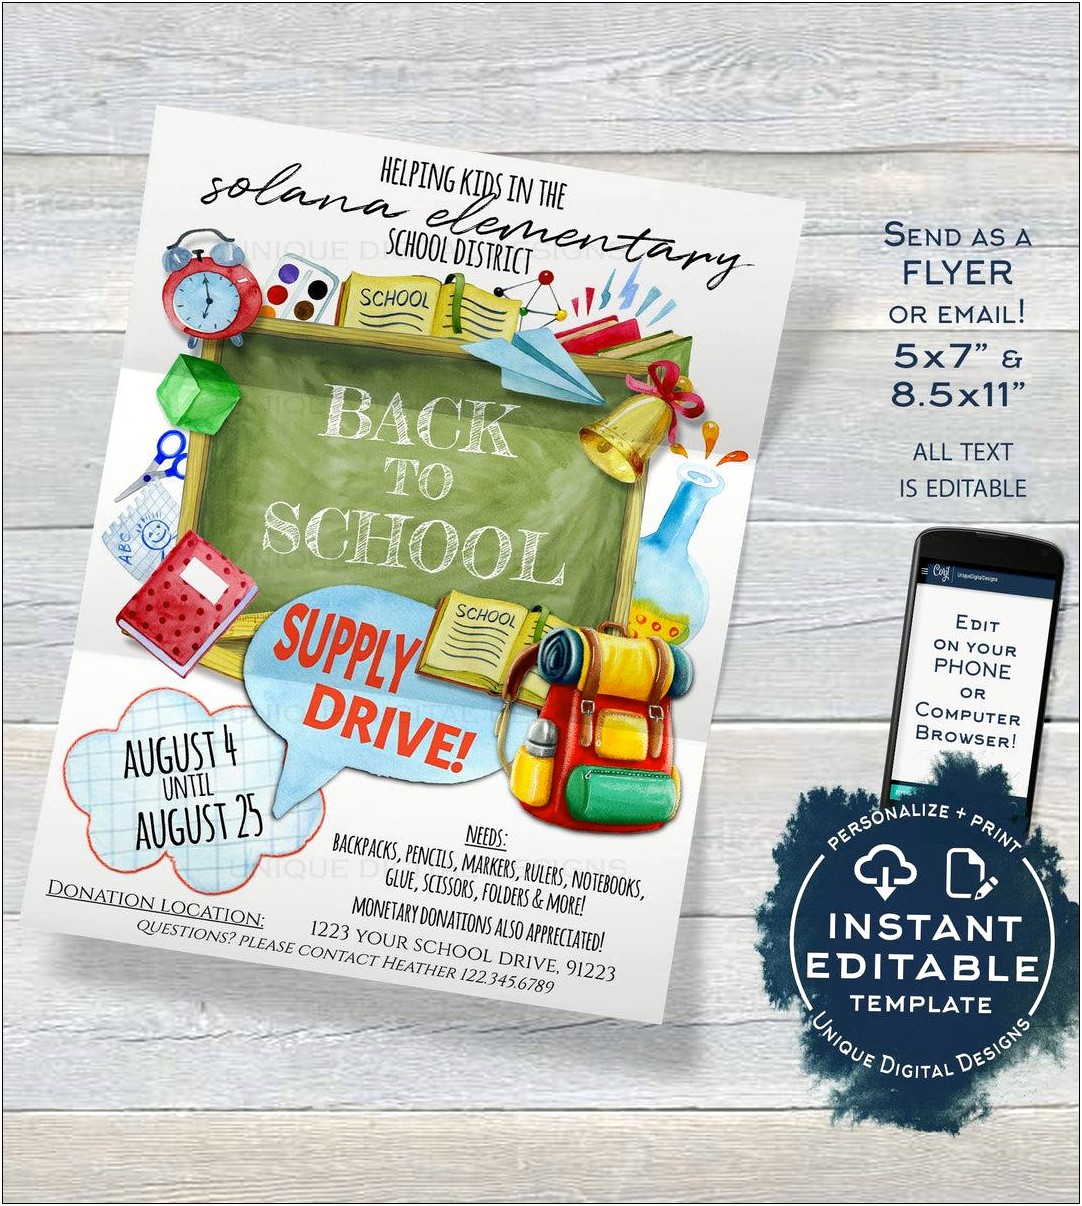 Free Back To School Drive Flyer Template